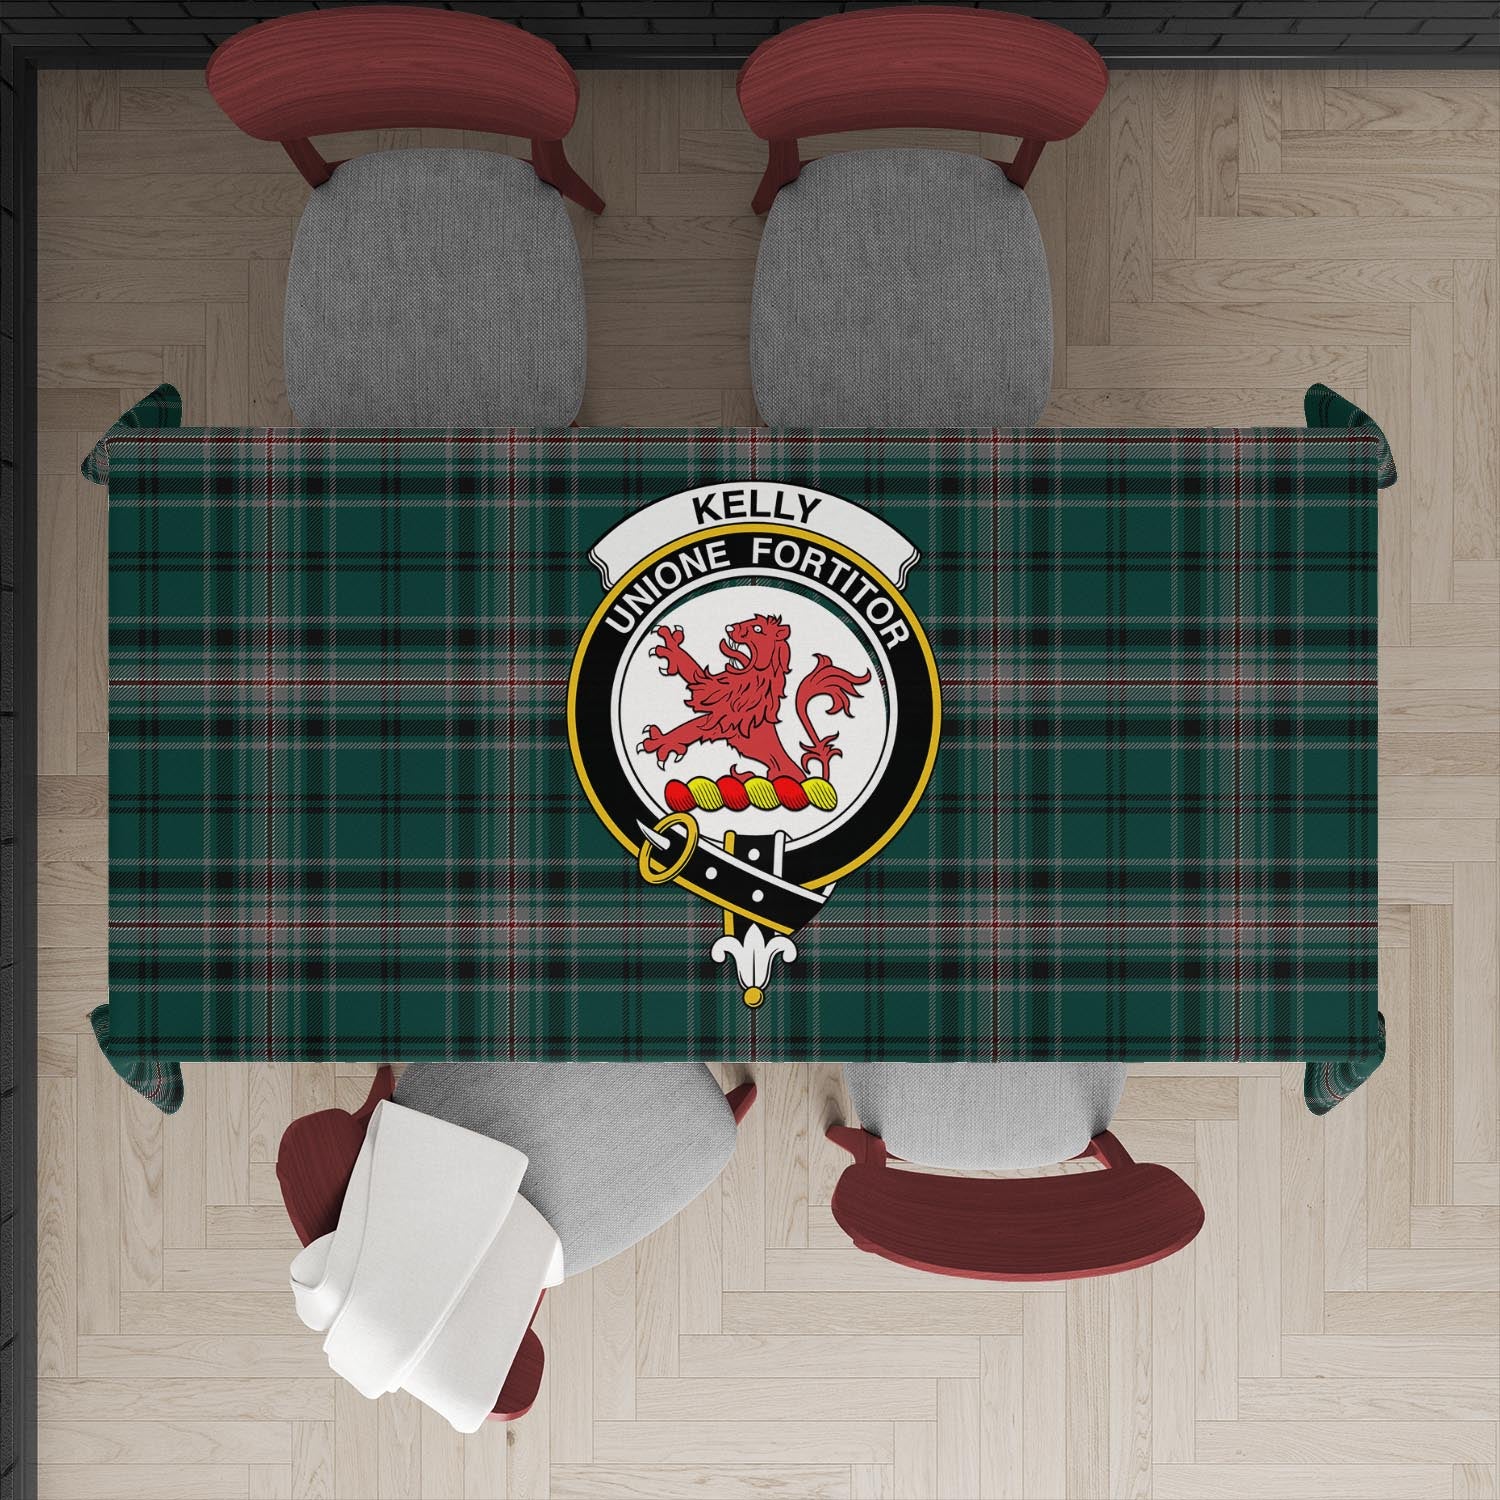 kelly-of-sleat-hunting-tatan-tablecloth-with-family-crest